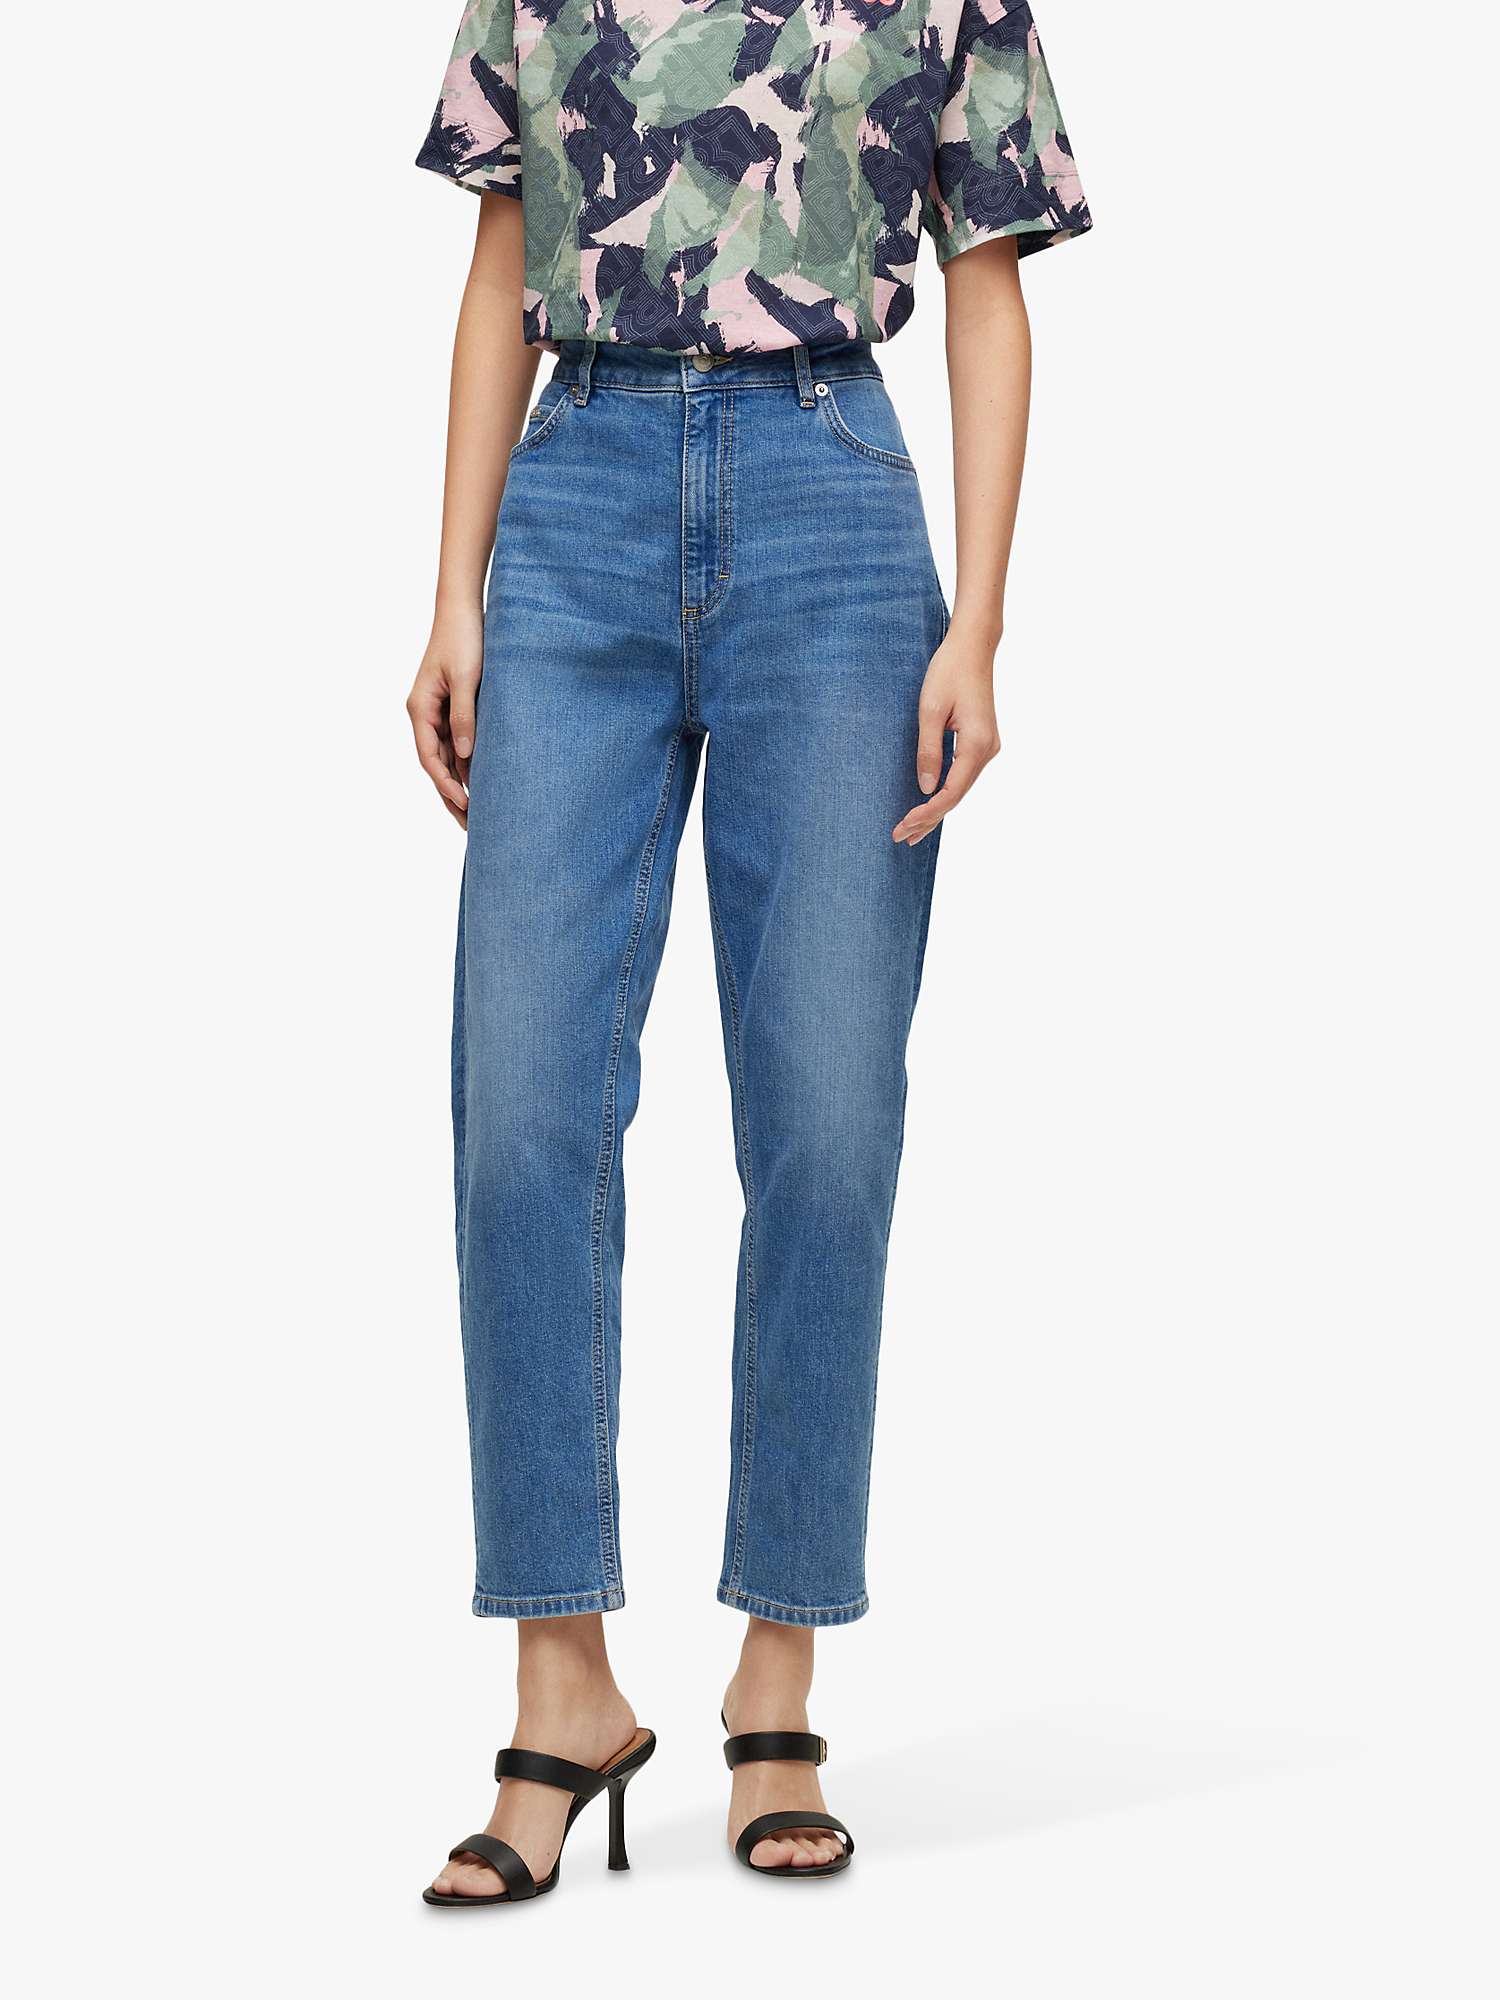 Buy BOSS Ruth Tapered Jeans, Bright Blue Online at johnlewis.com